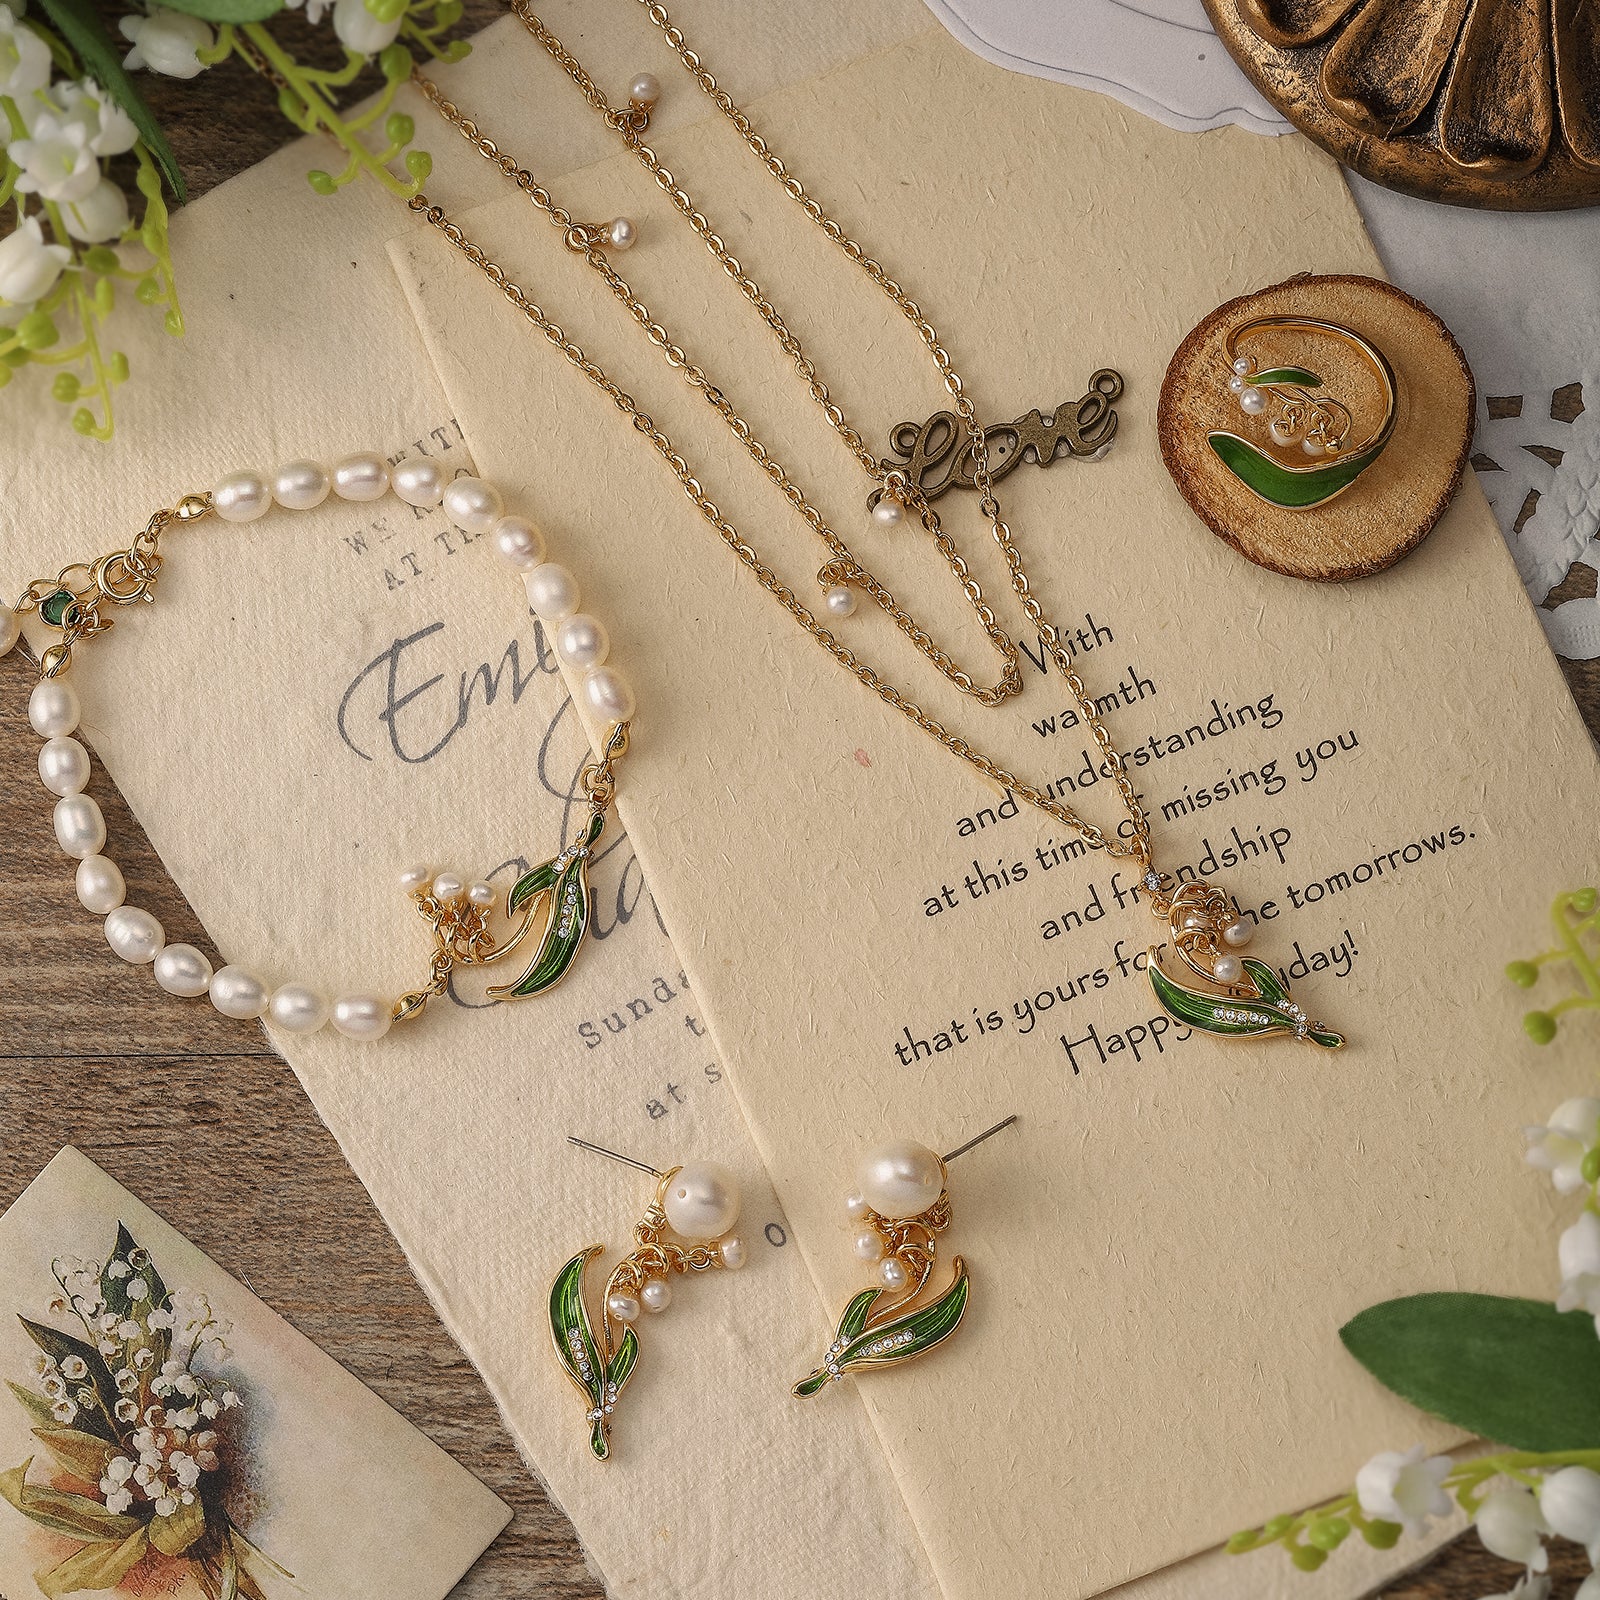 Lily Of The Valley Jewelry Gift Set with Gift Wrapping